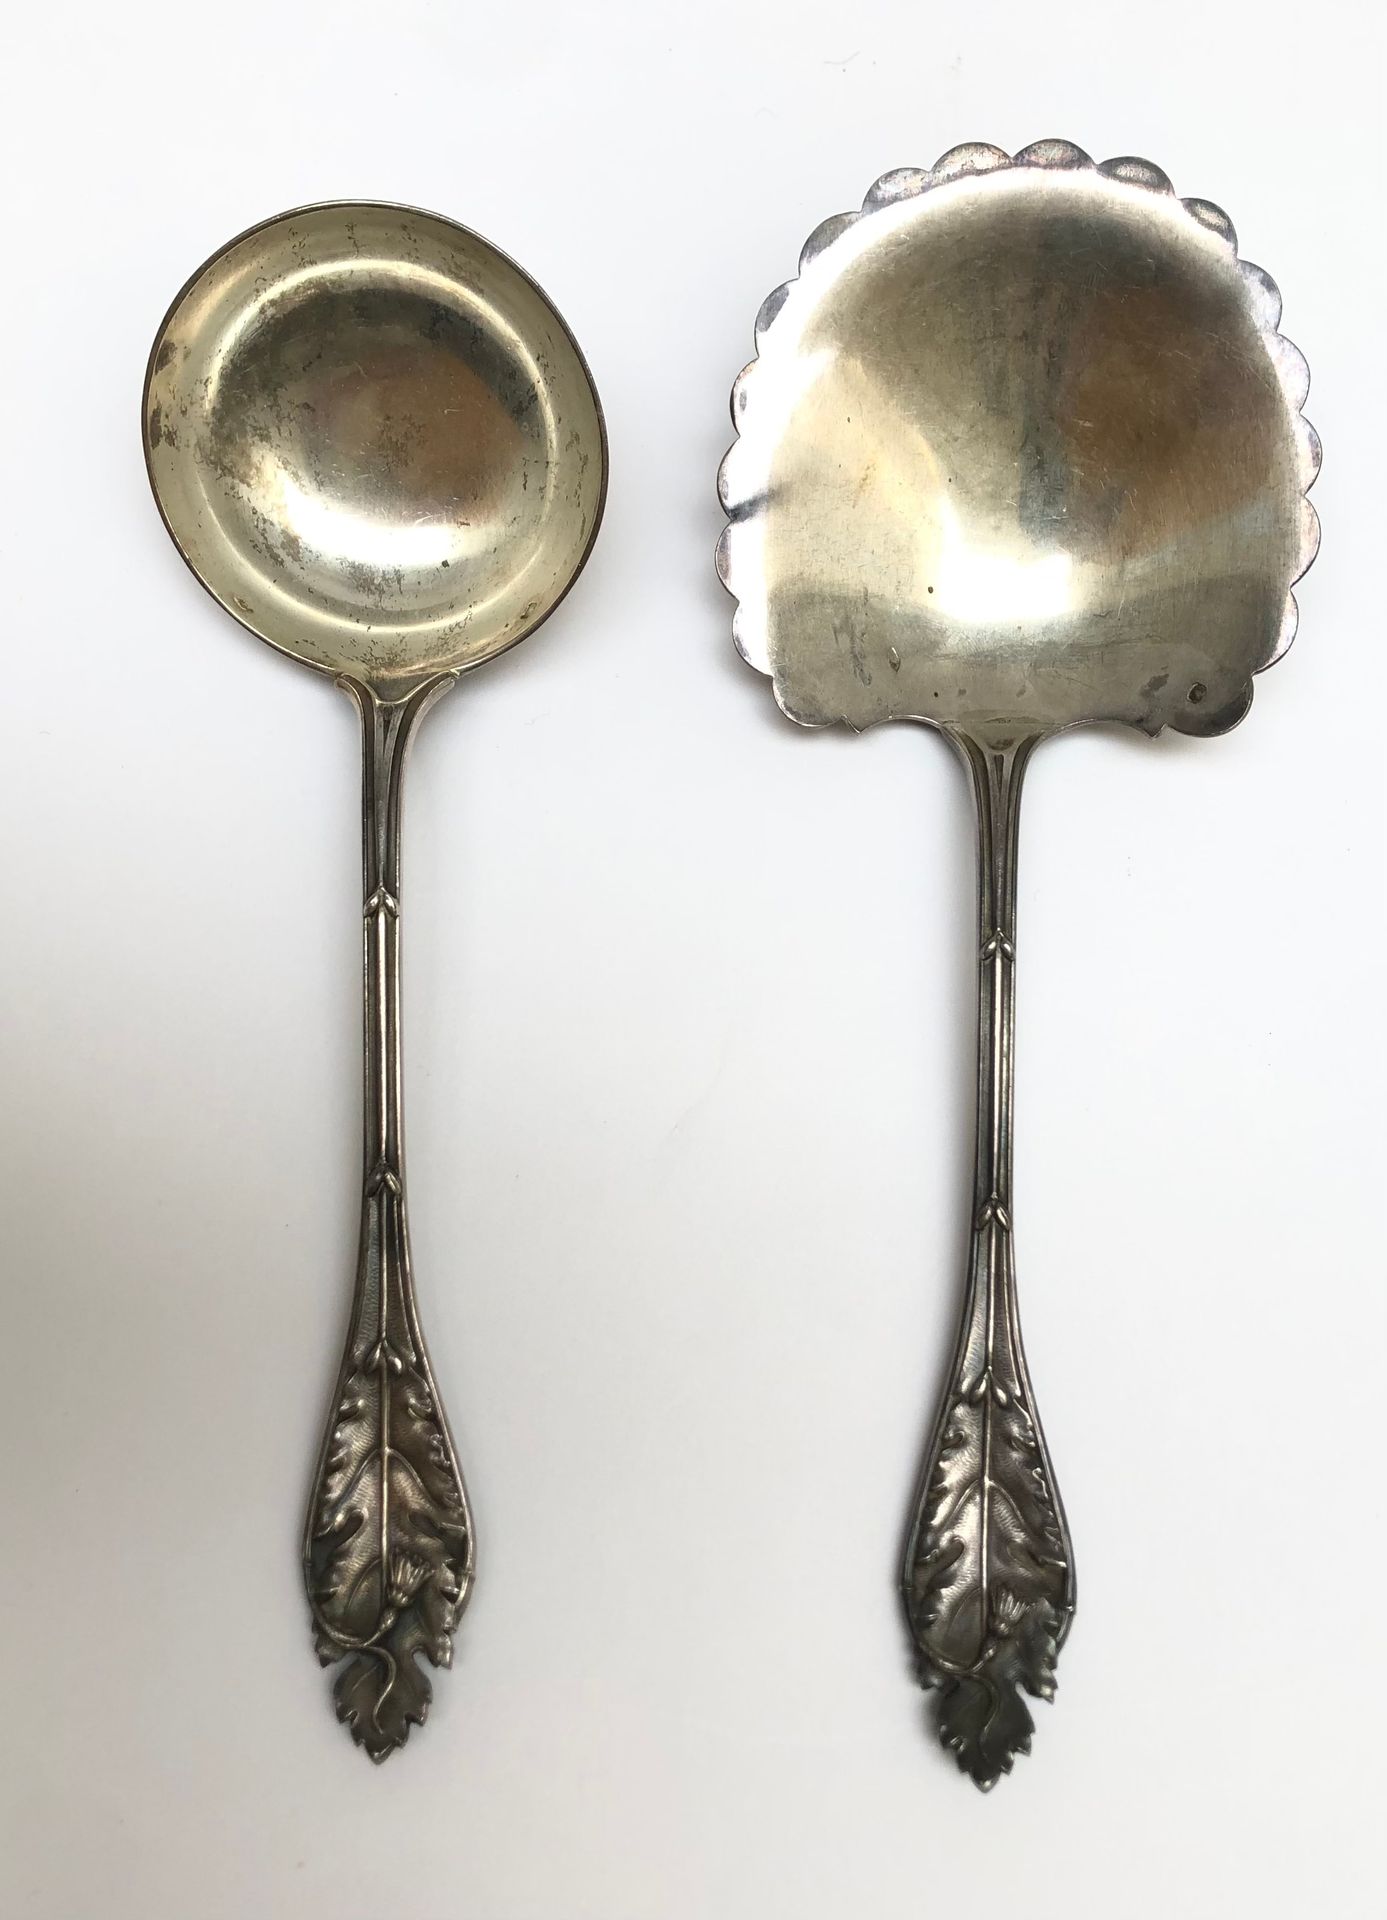 Null Silver serving pieces, 1930 model, including a cream spoon and a spoon for &hellip;